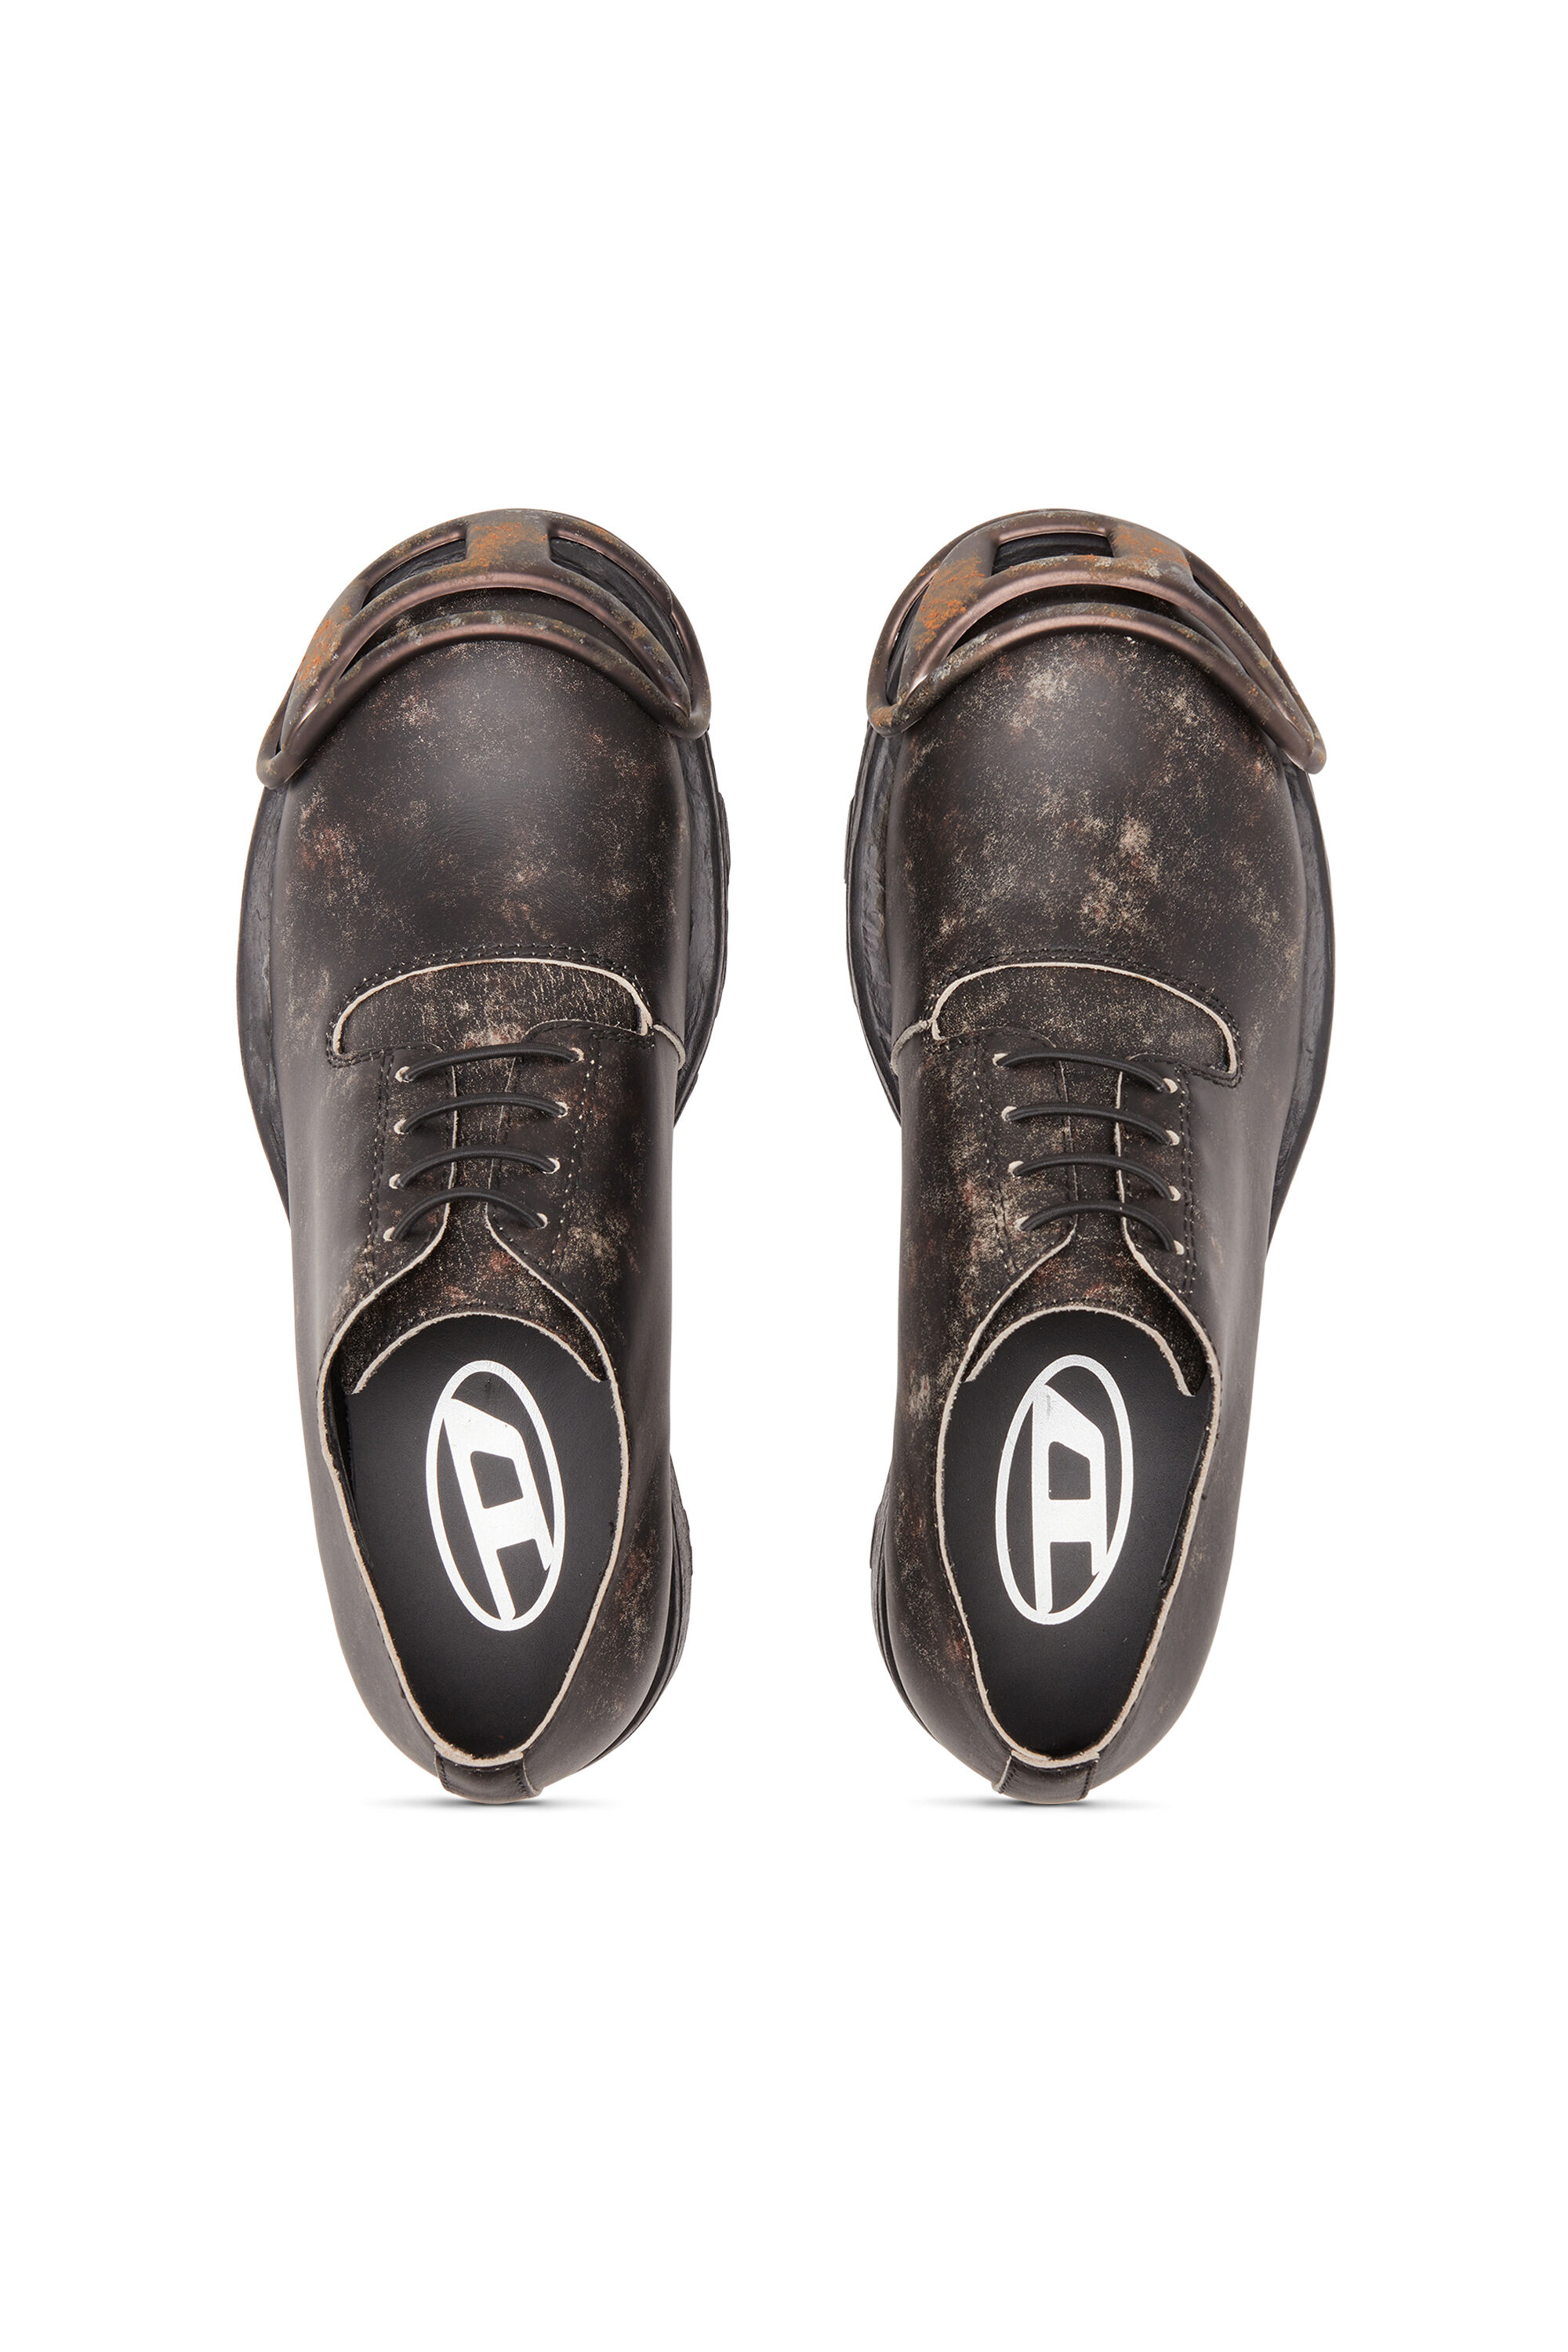 Diesel - D-HAMMER SO D, Man D-Hammer-Derby shoes in treated leather in Brown - Image 4